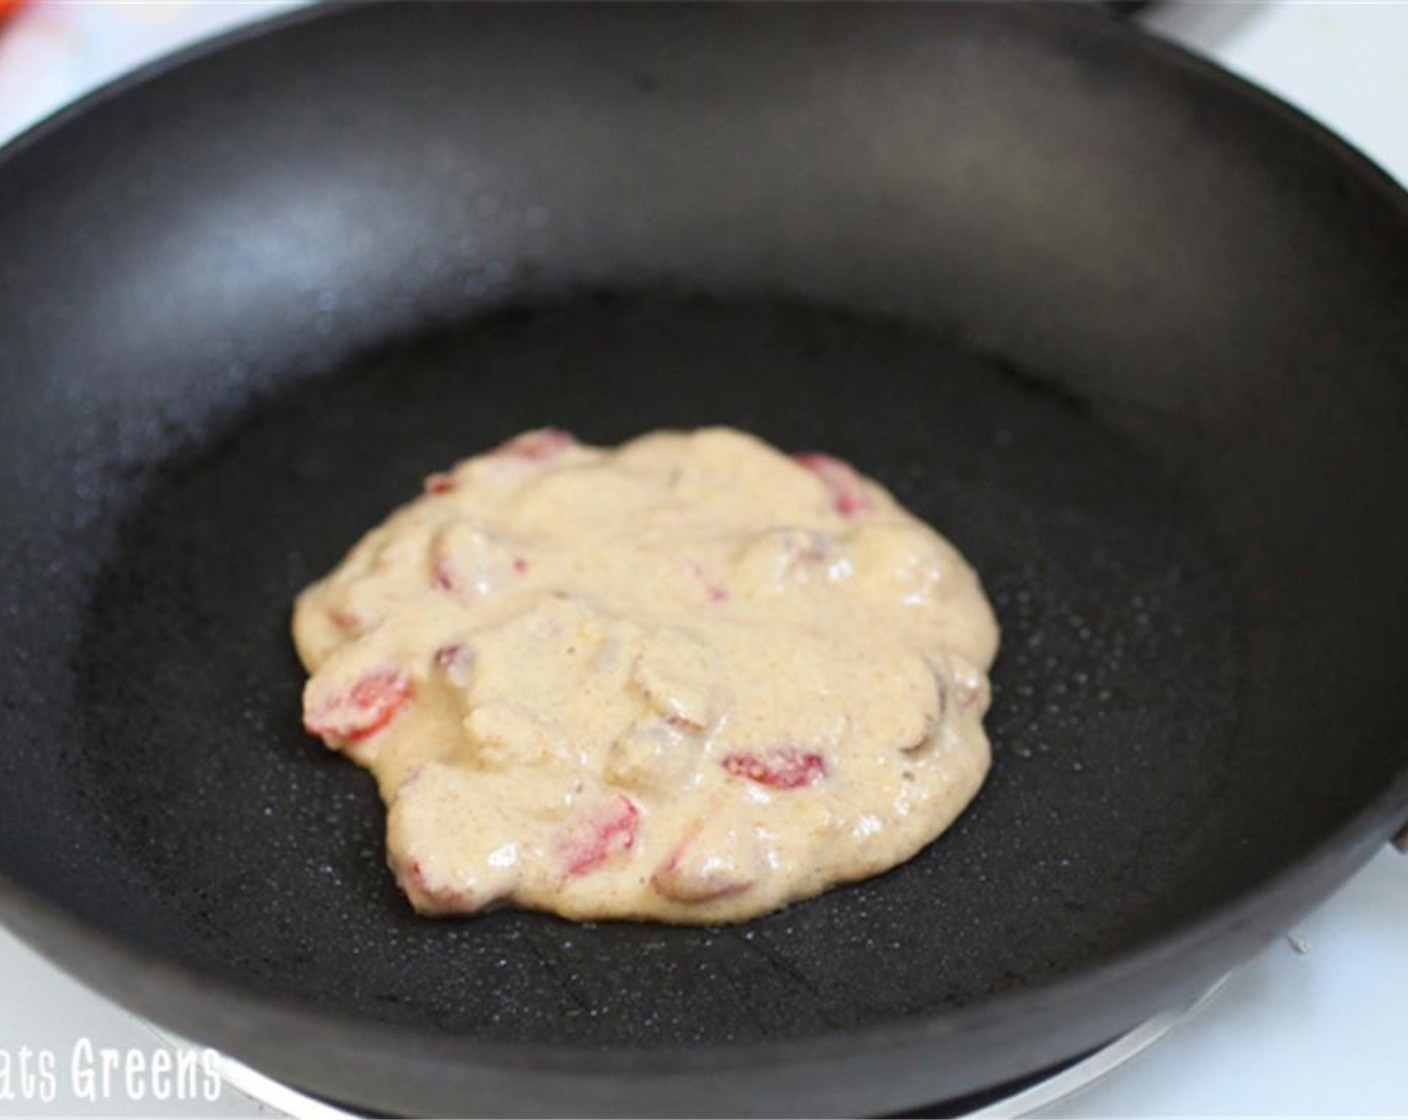 step 5 In a slightly greased frying pan, skillet, or griddle. Place one scoop of patter into the pan over medium heat. Cook until the batter starts to bubble, then flip the pancake over for a few minutes until it's fully cooked.